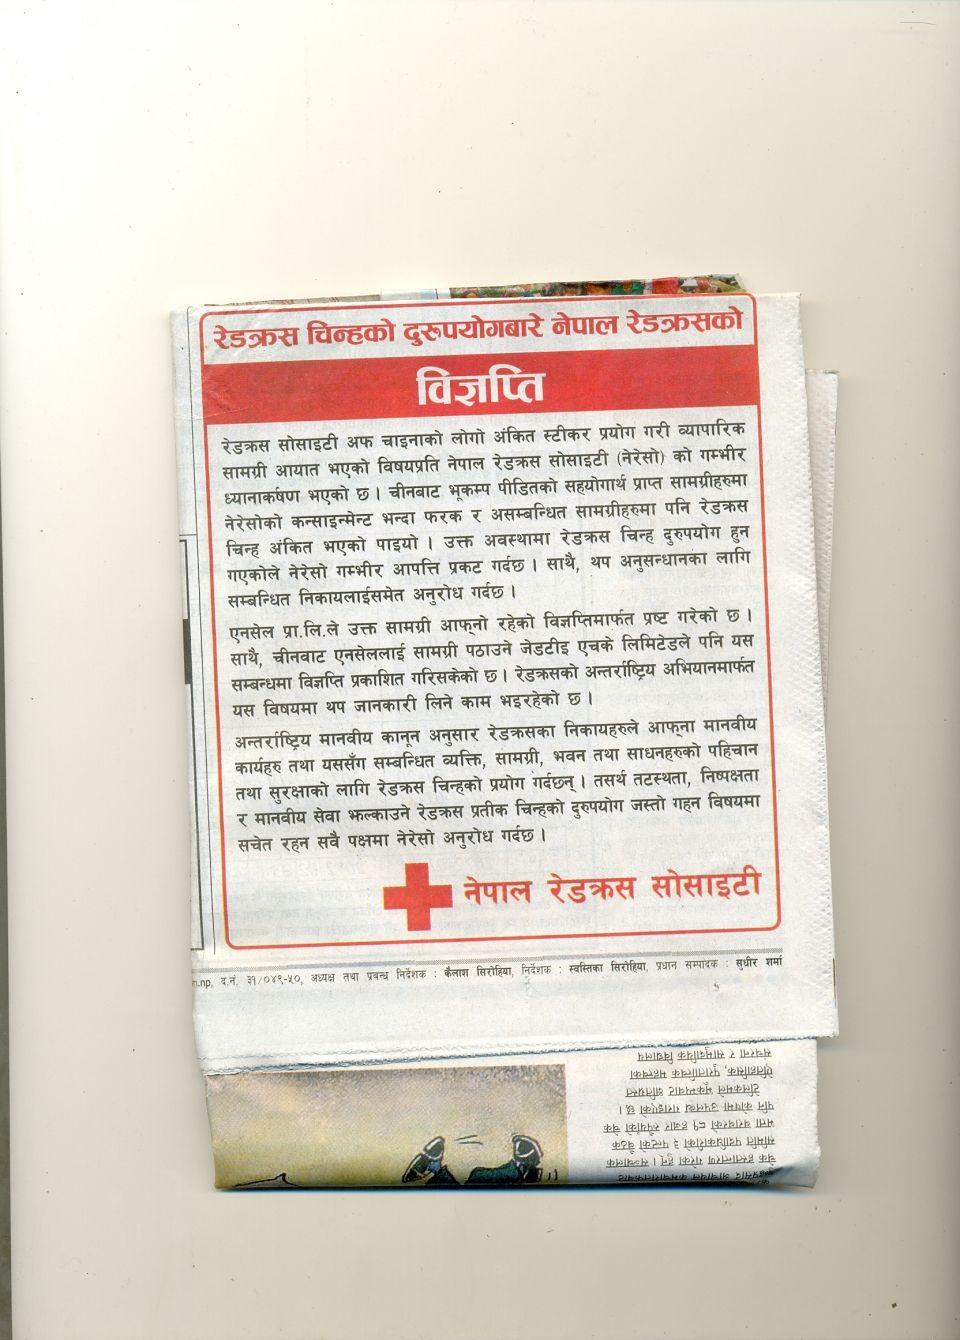 Nepal Red Cross Logo - Red Cross expresses concern over the misuse of the Red Cross emblem ...